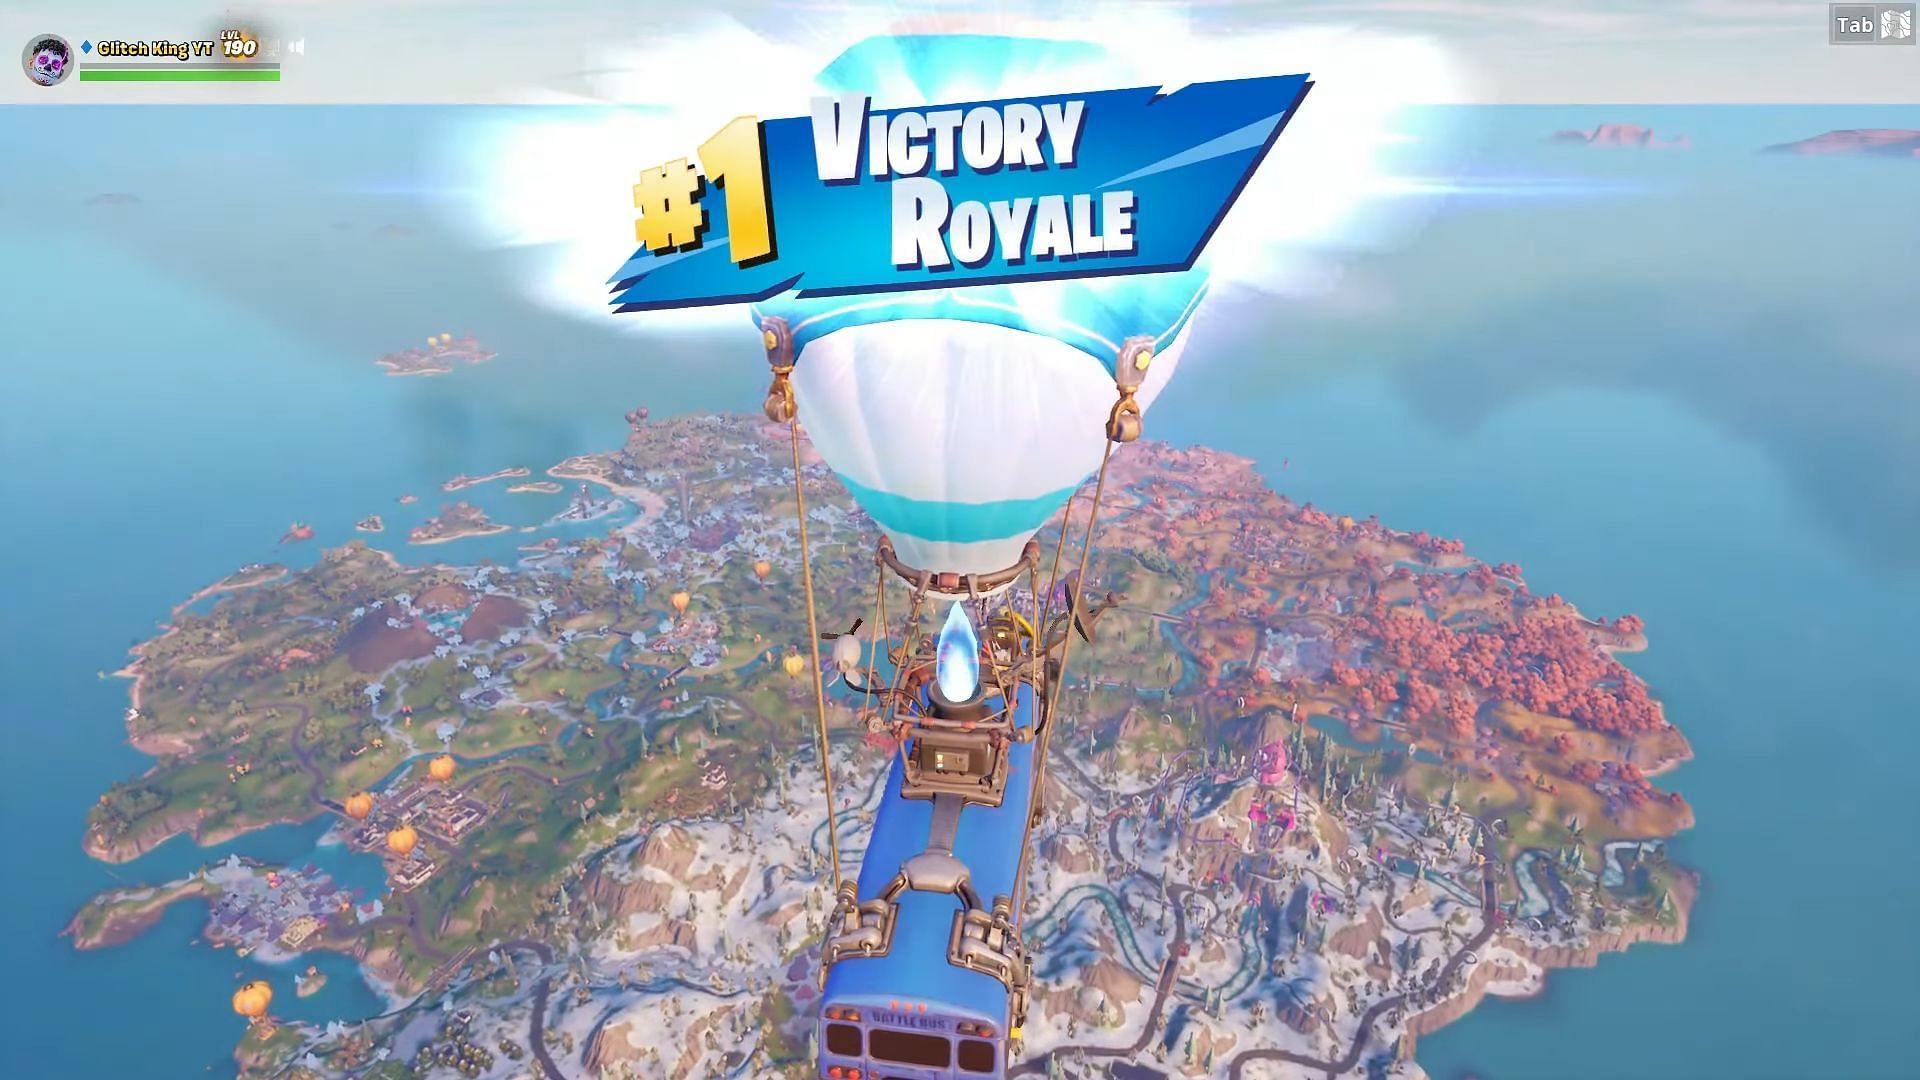 Fortnite player sets world record for the fastest win ever